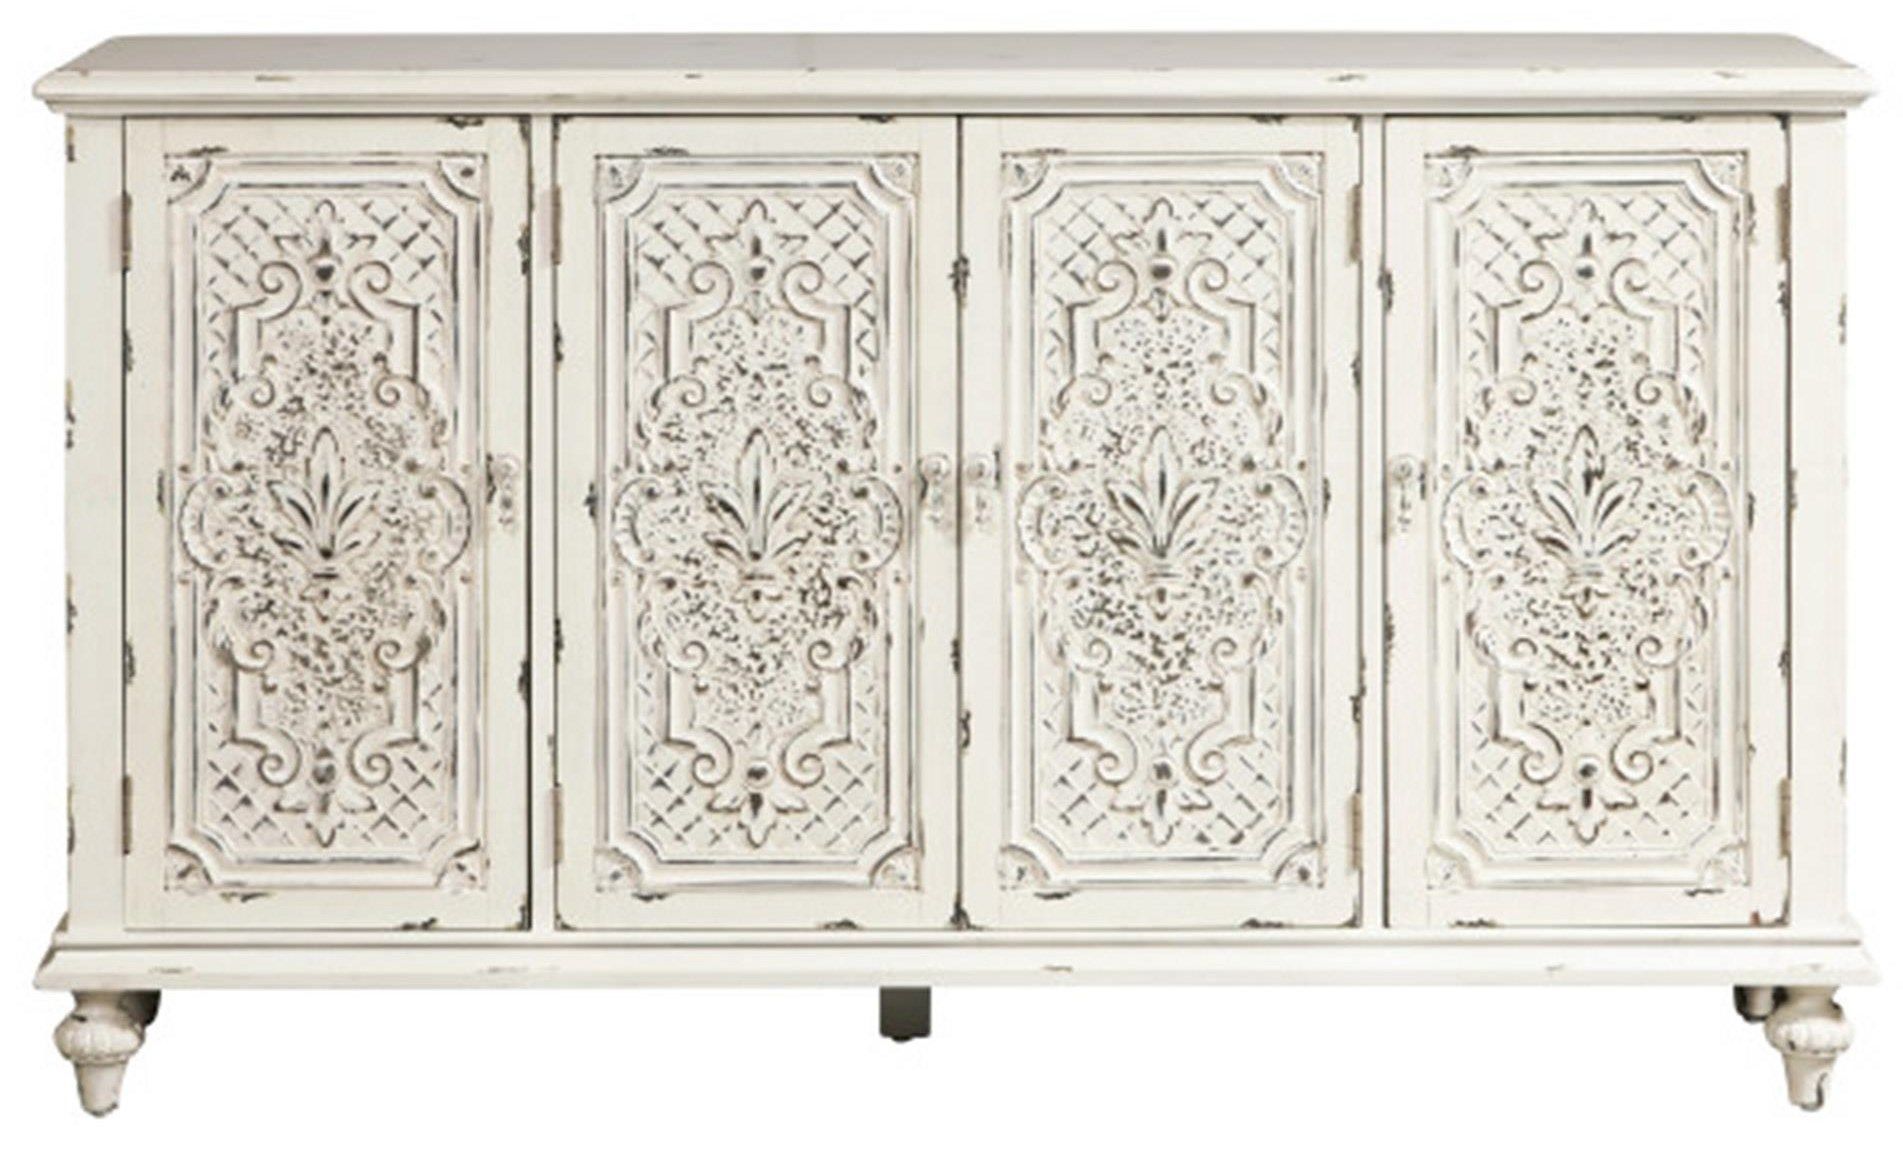 Accents Ornate 4 Door Credenzapulaski Furniture | Home Pertaining To Tott And Eling Sideboards (View 19 of 30)